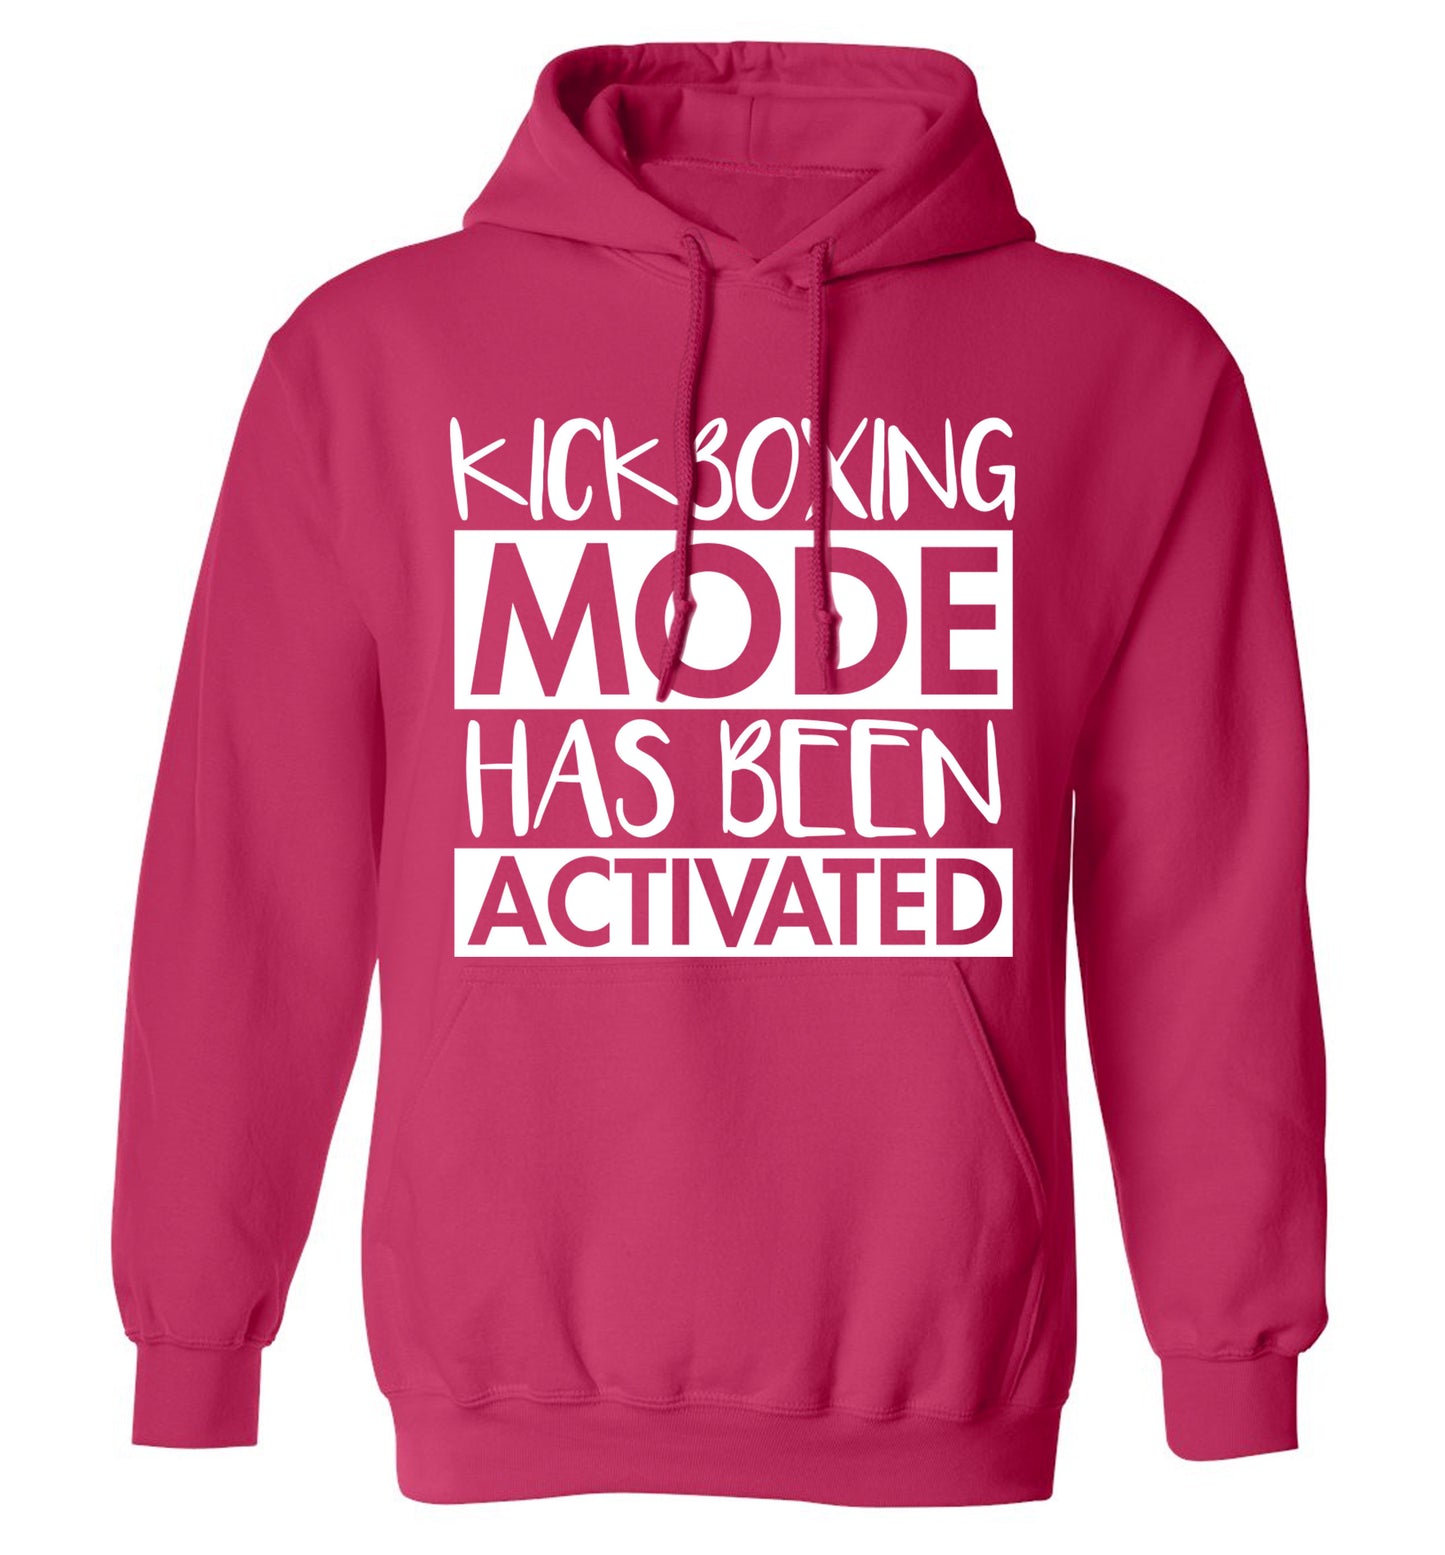 Kickboxing mode activated adults unisex pink hoodie 2XL